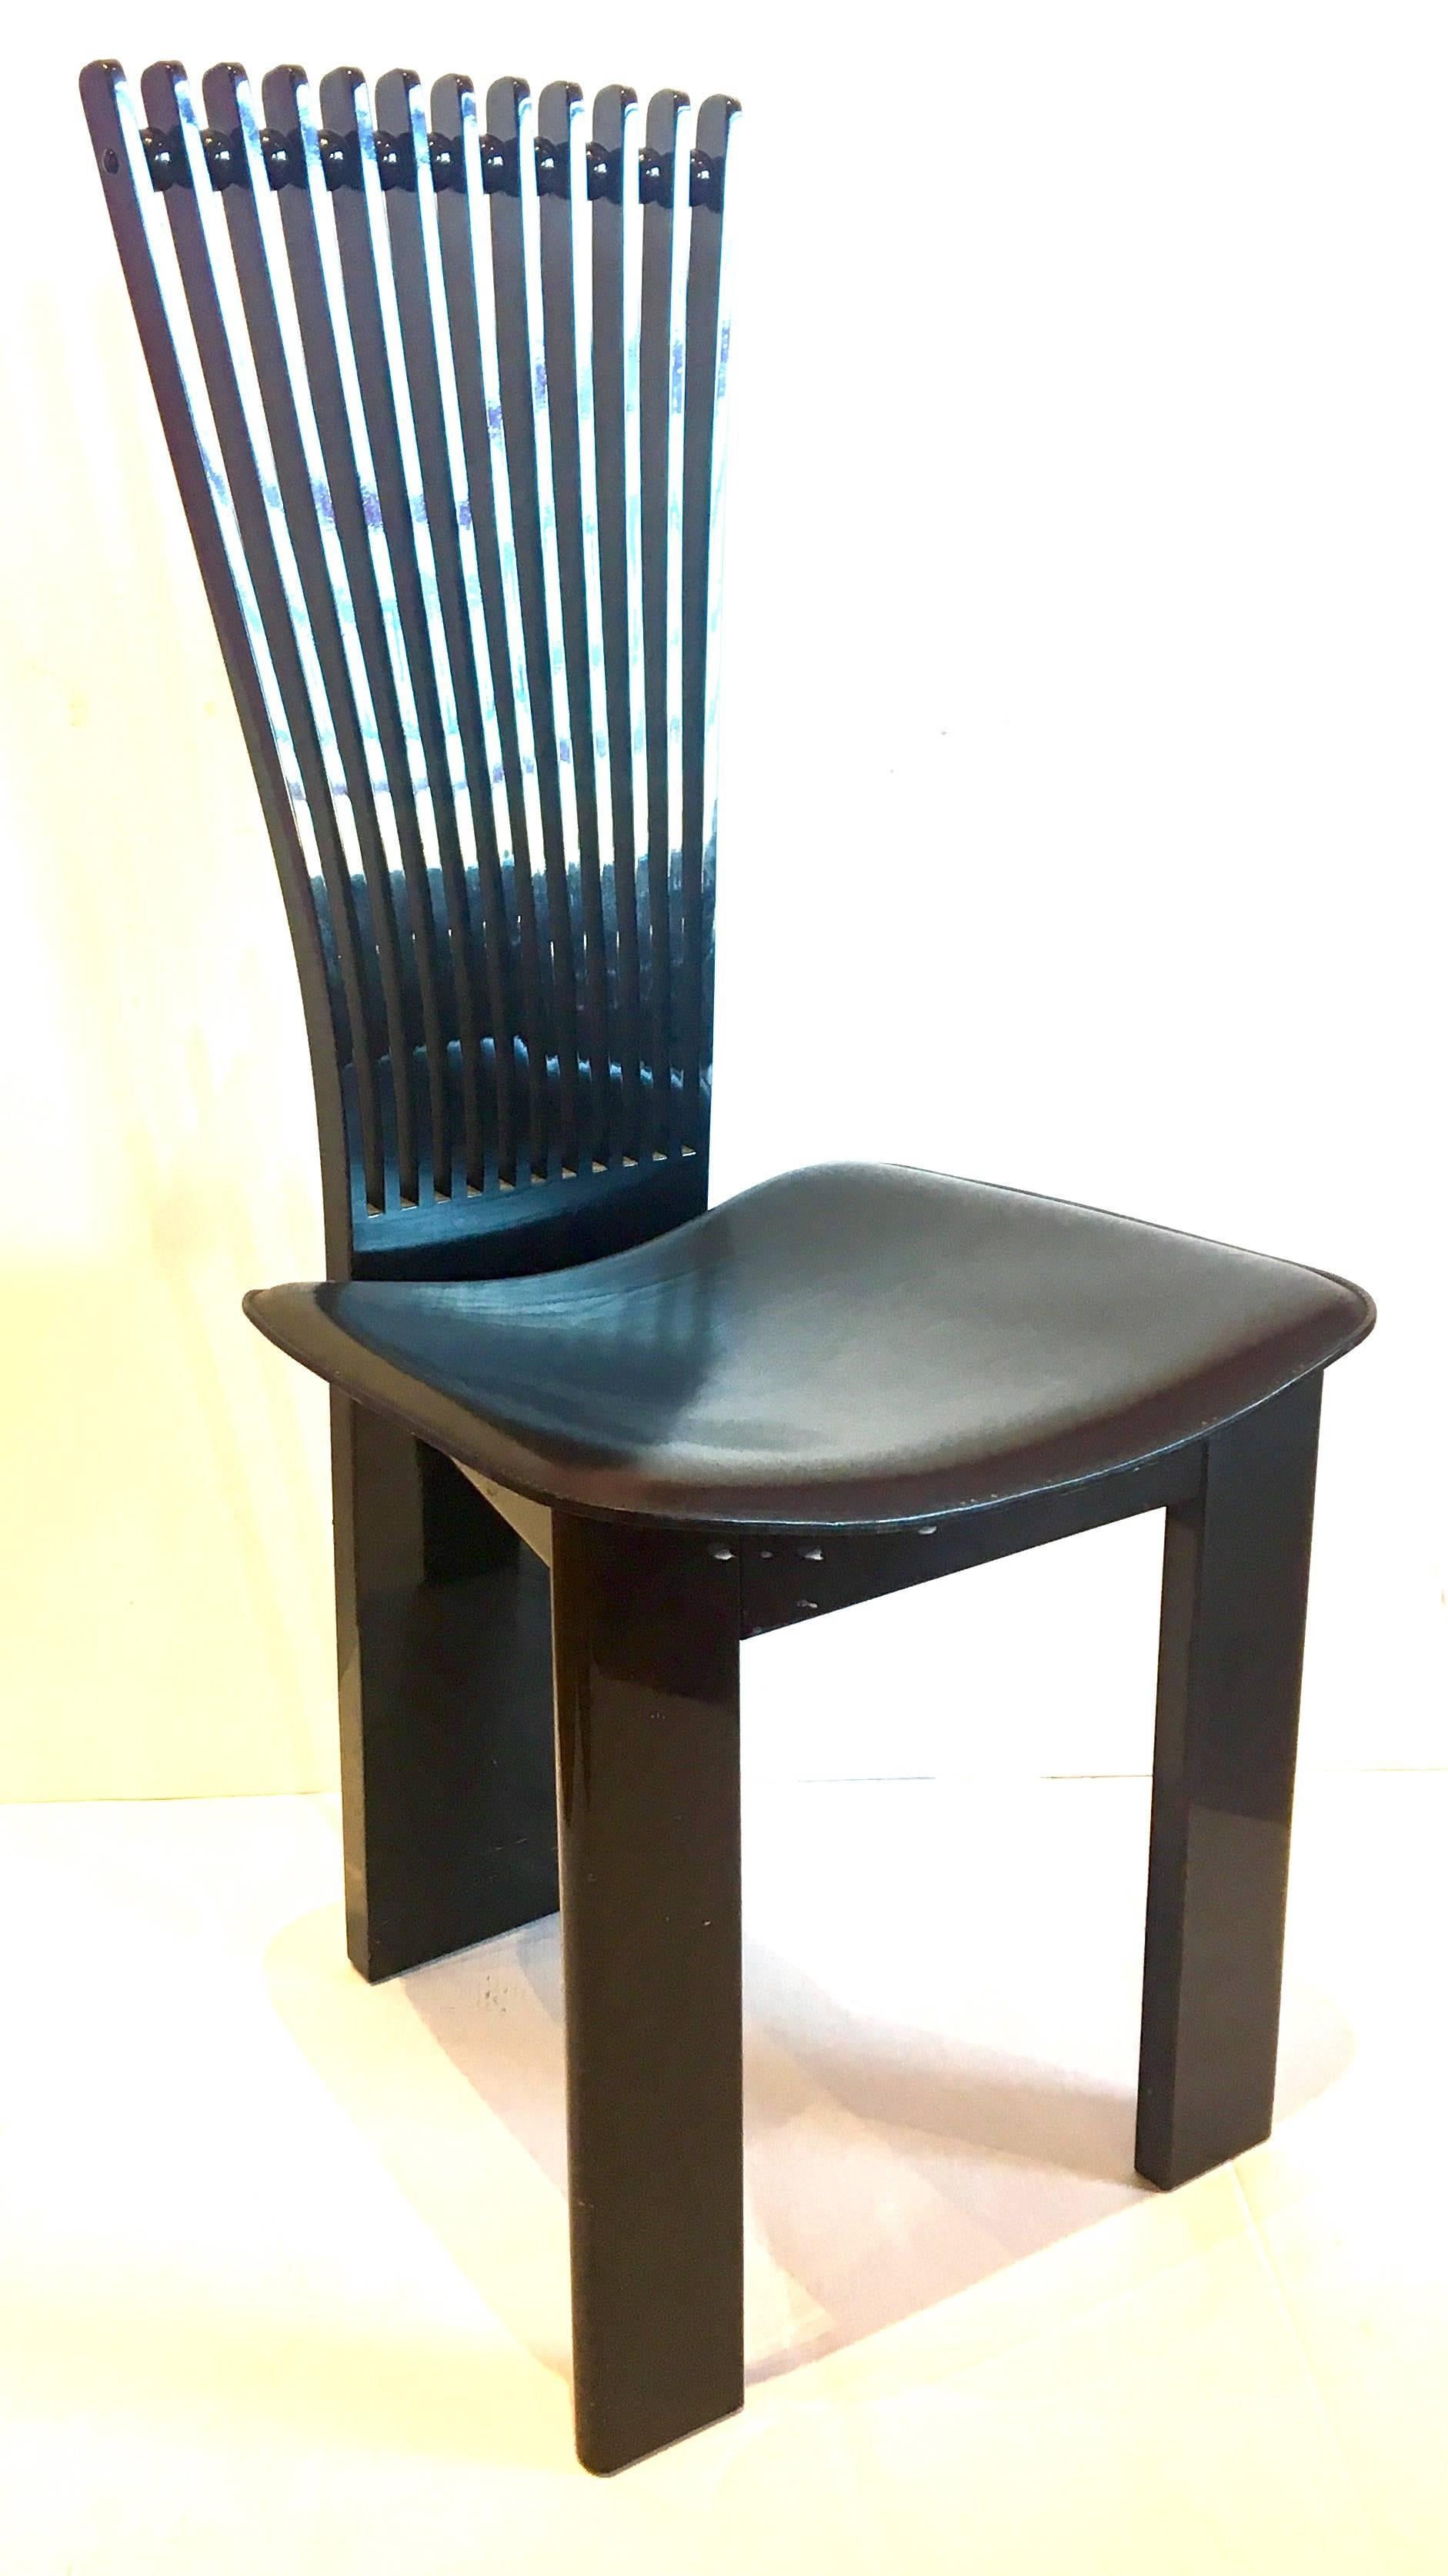 Set of four tall back Italian chairs by Pietro Costantini, circa 1990s in black lacquer glossy finish and handstitched black leather seat, solid and sturdy elegant chairs, stamped made in Italy by Pietro Costantini.